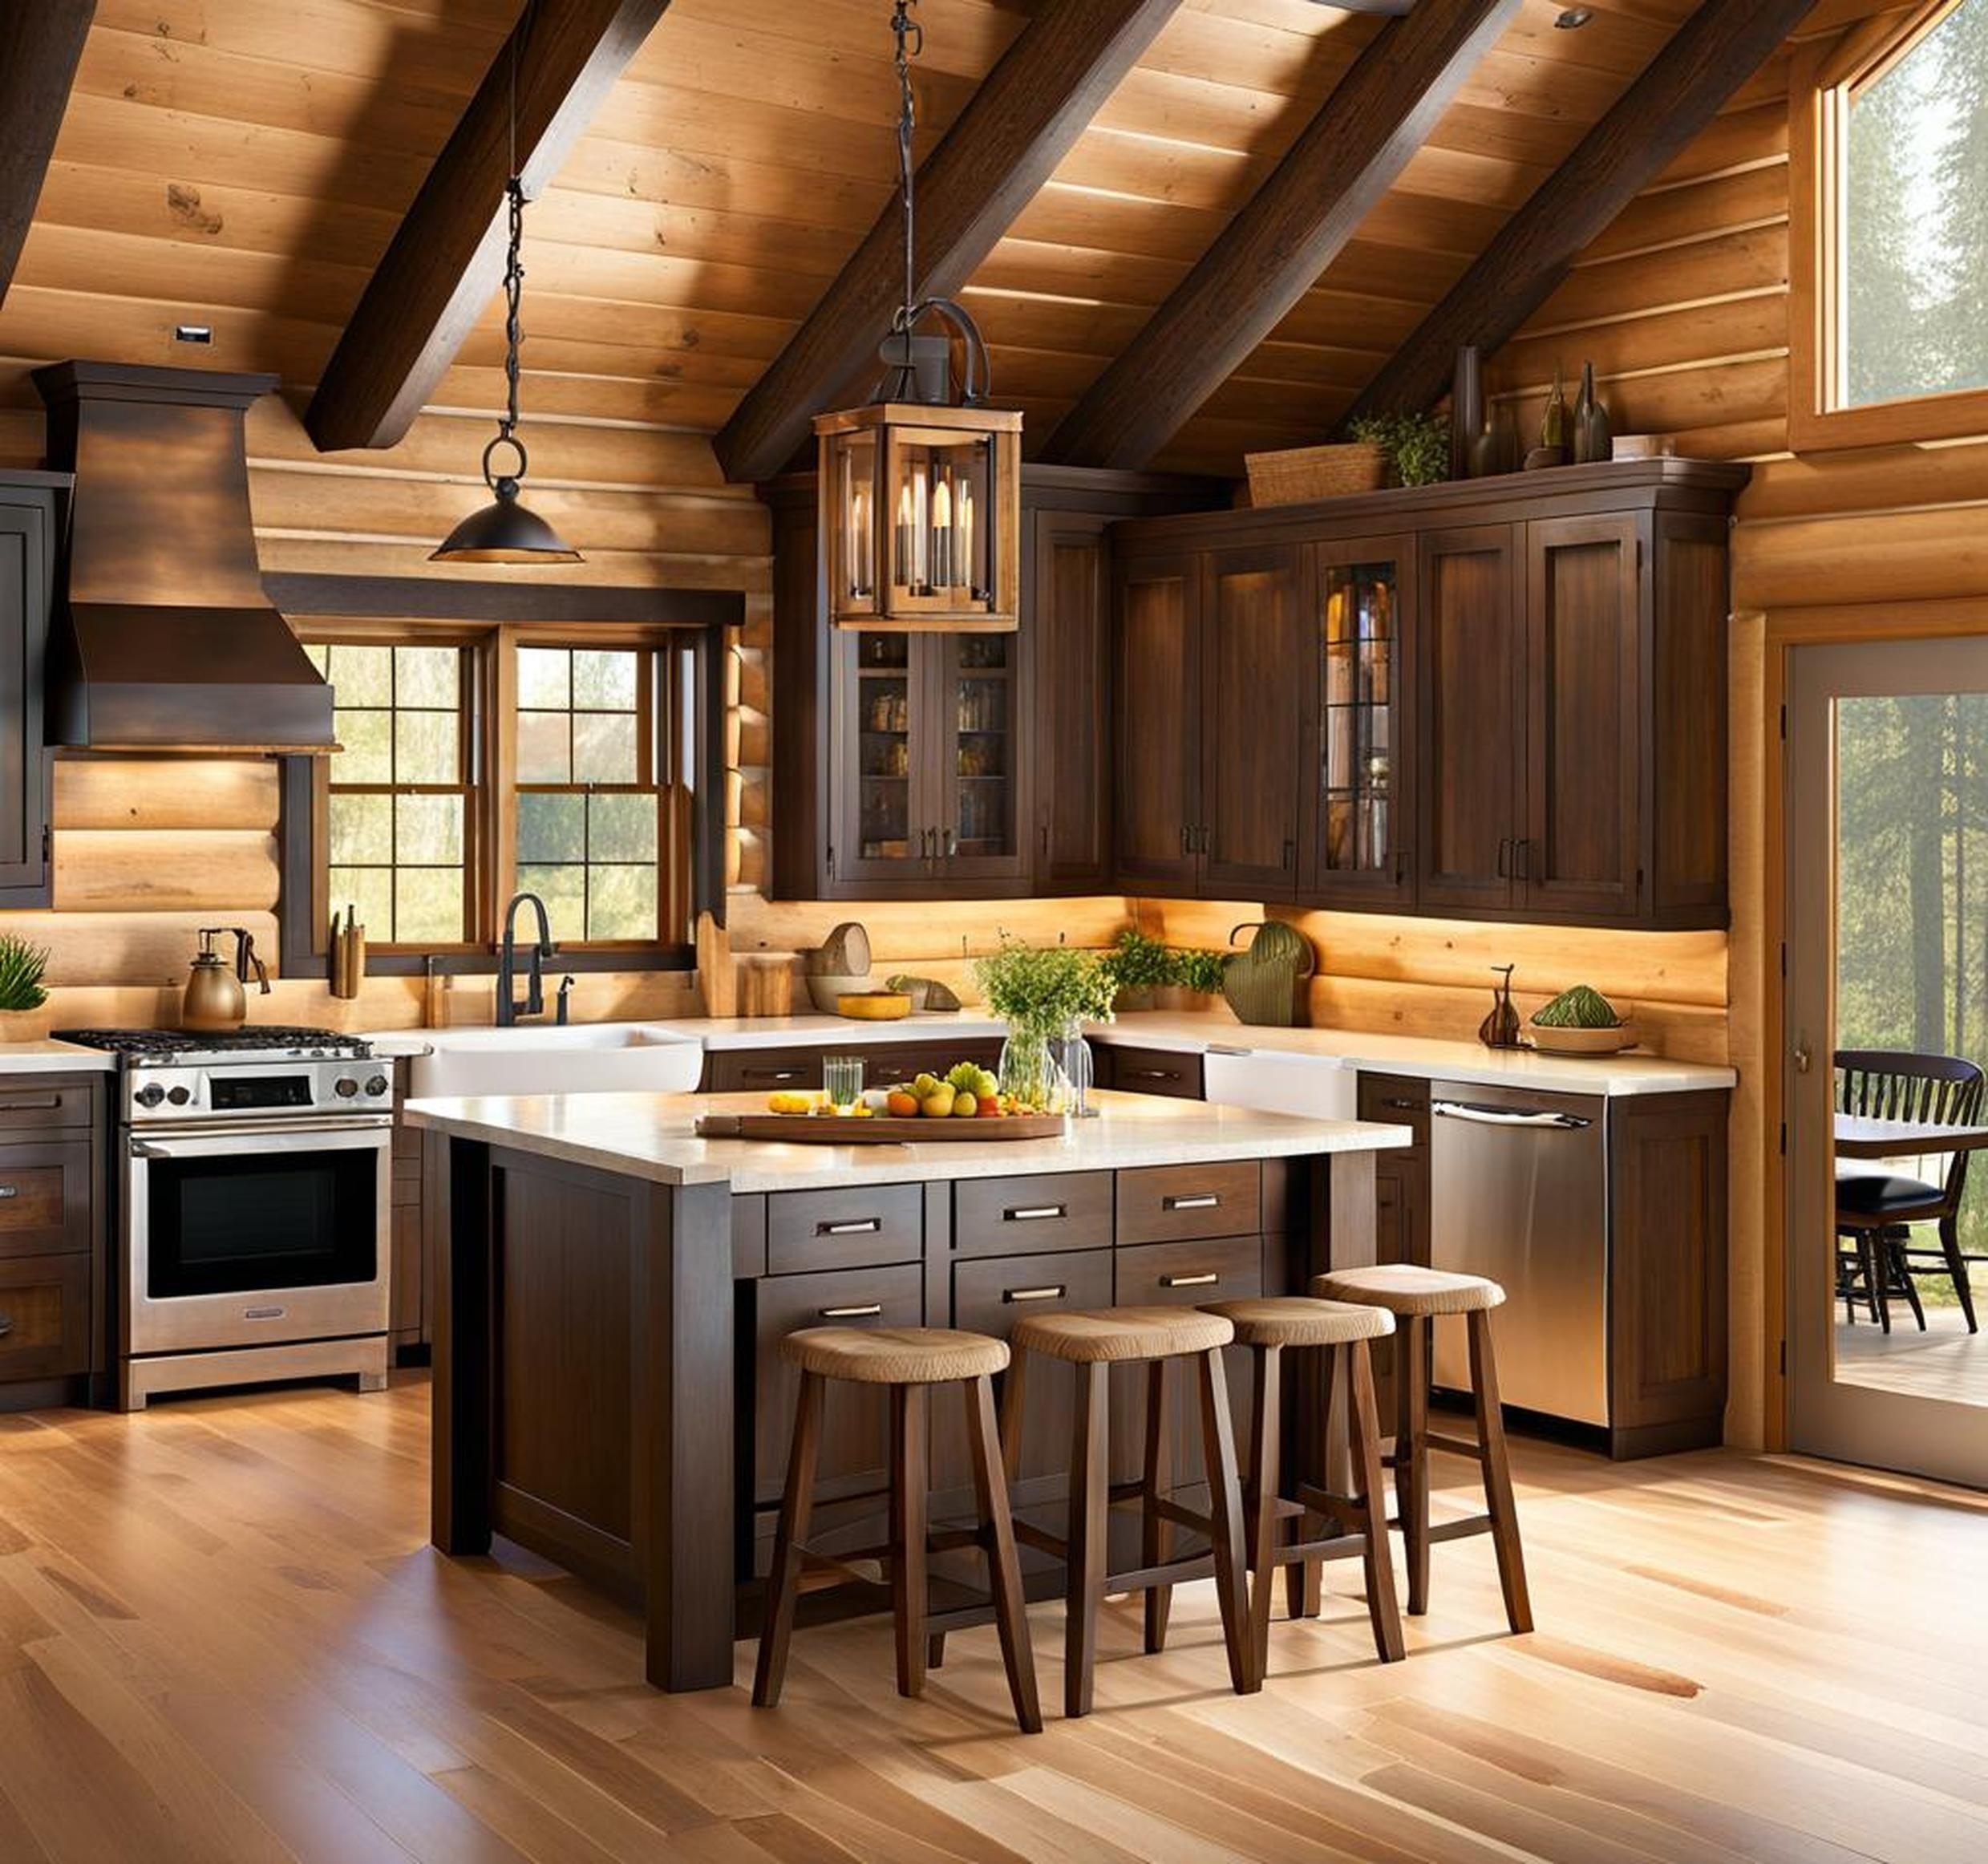 kitchens in log cabins